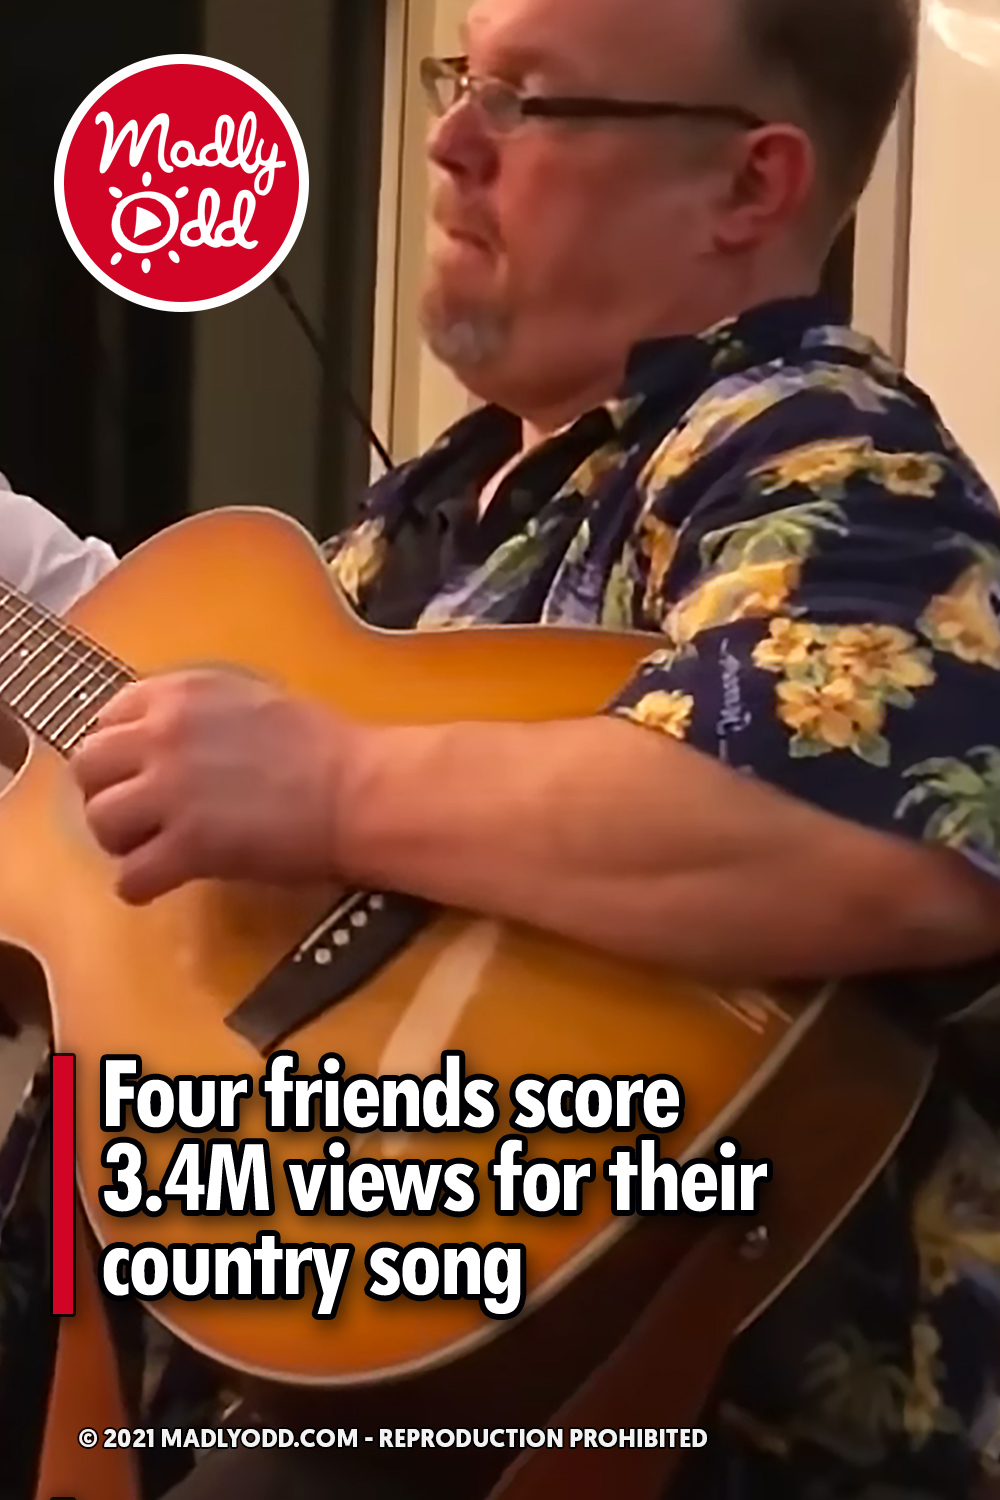 Four friends score 3.4M views for their country song